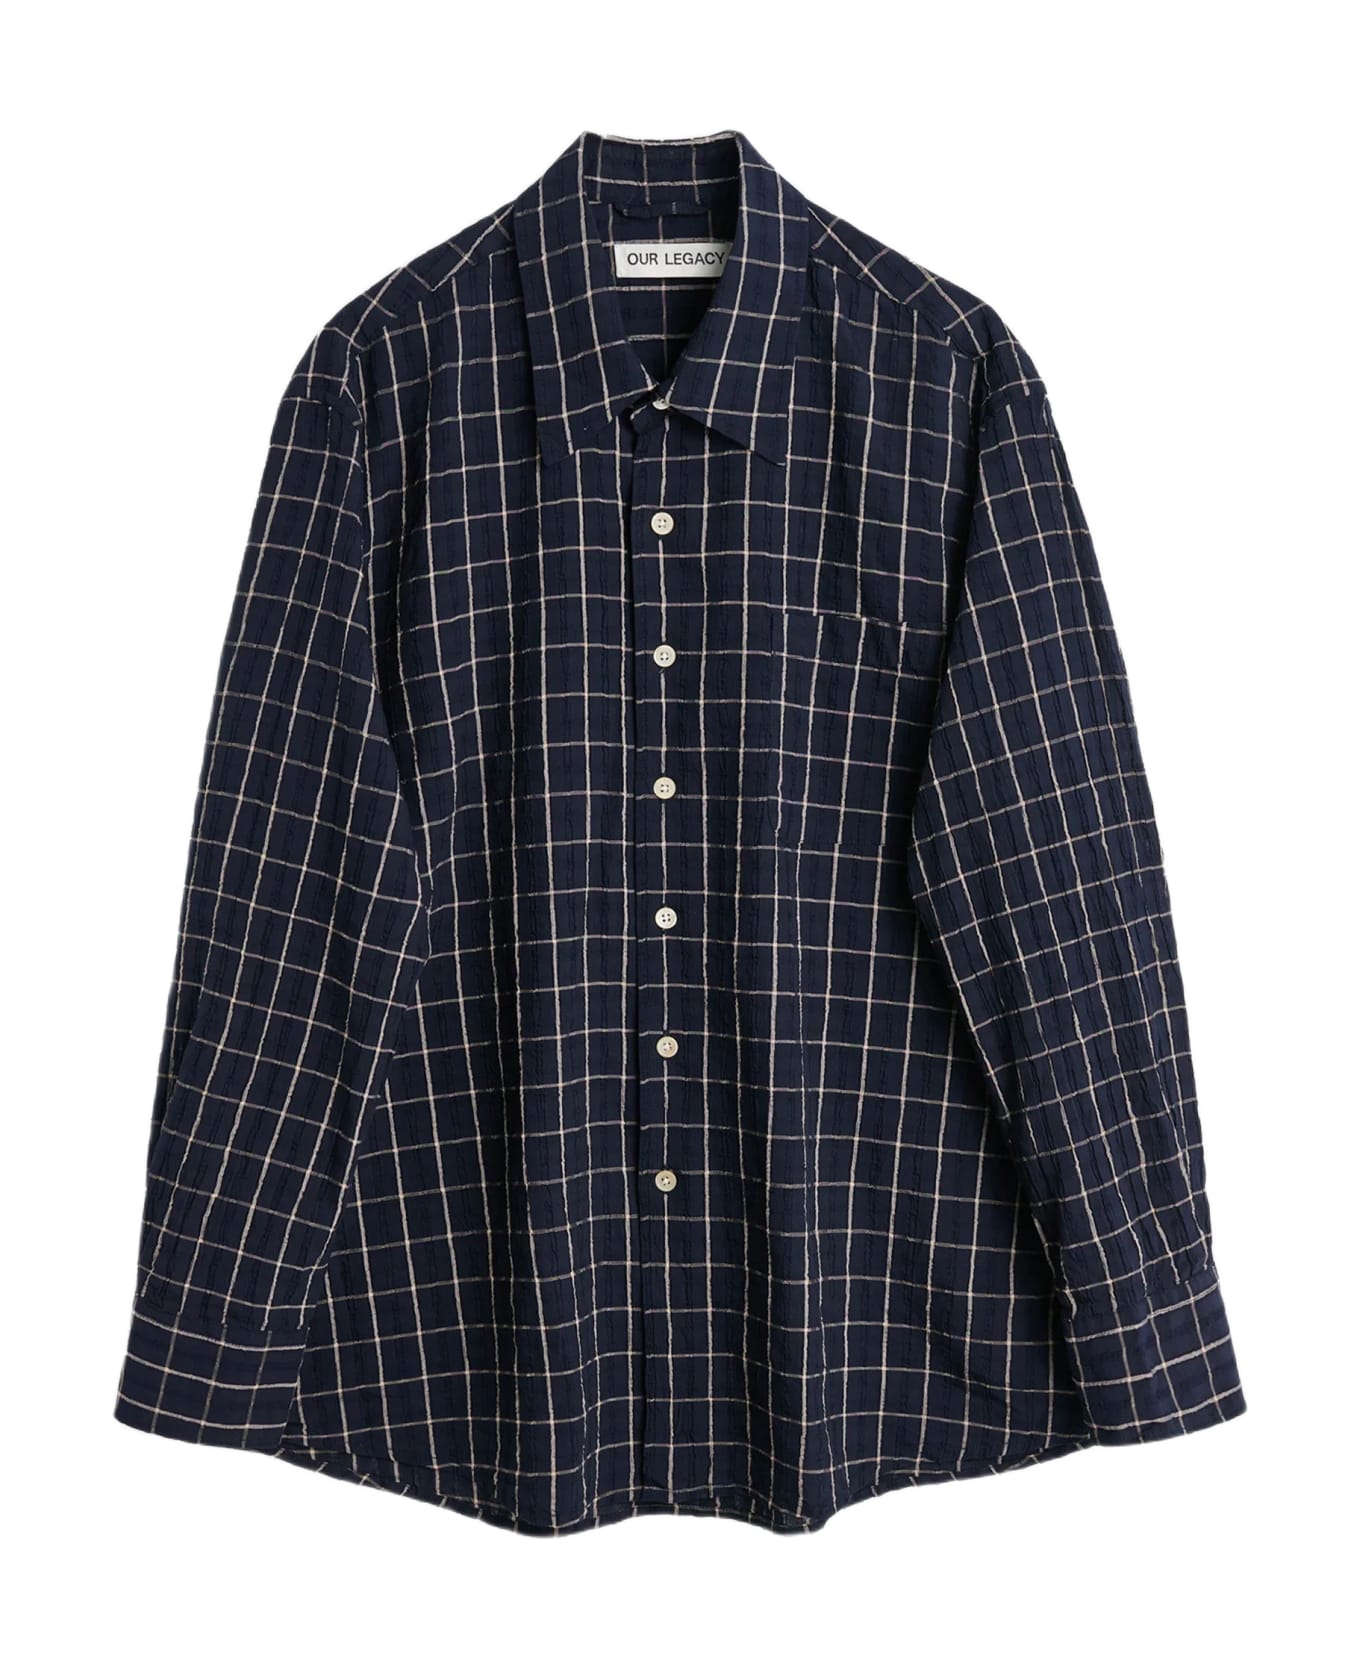 Our Legacy Above Shirt Dark blue checked shirt with long sleeves - Above Shirt - Blu